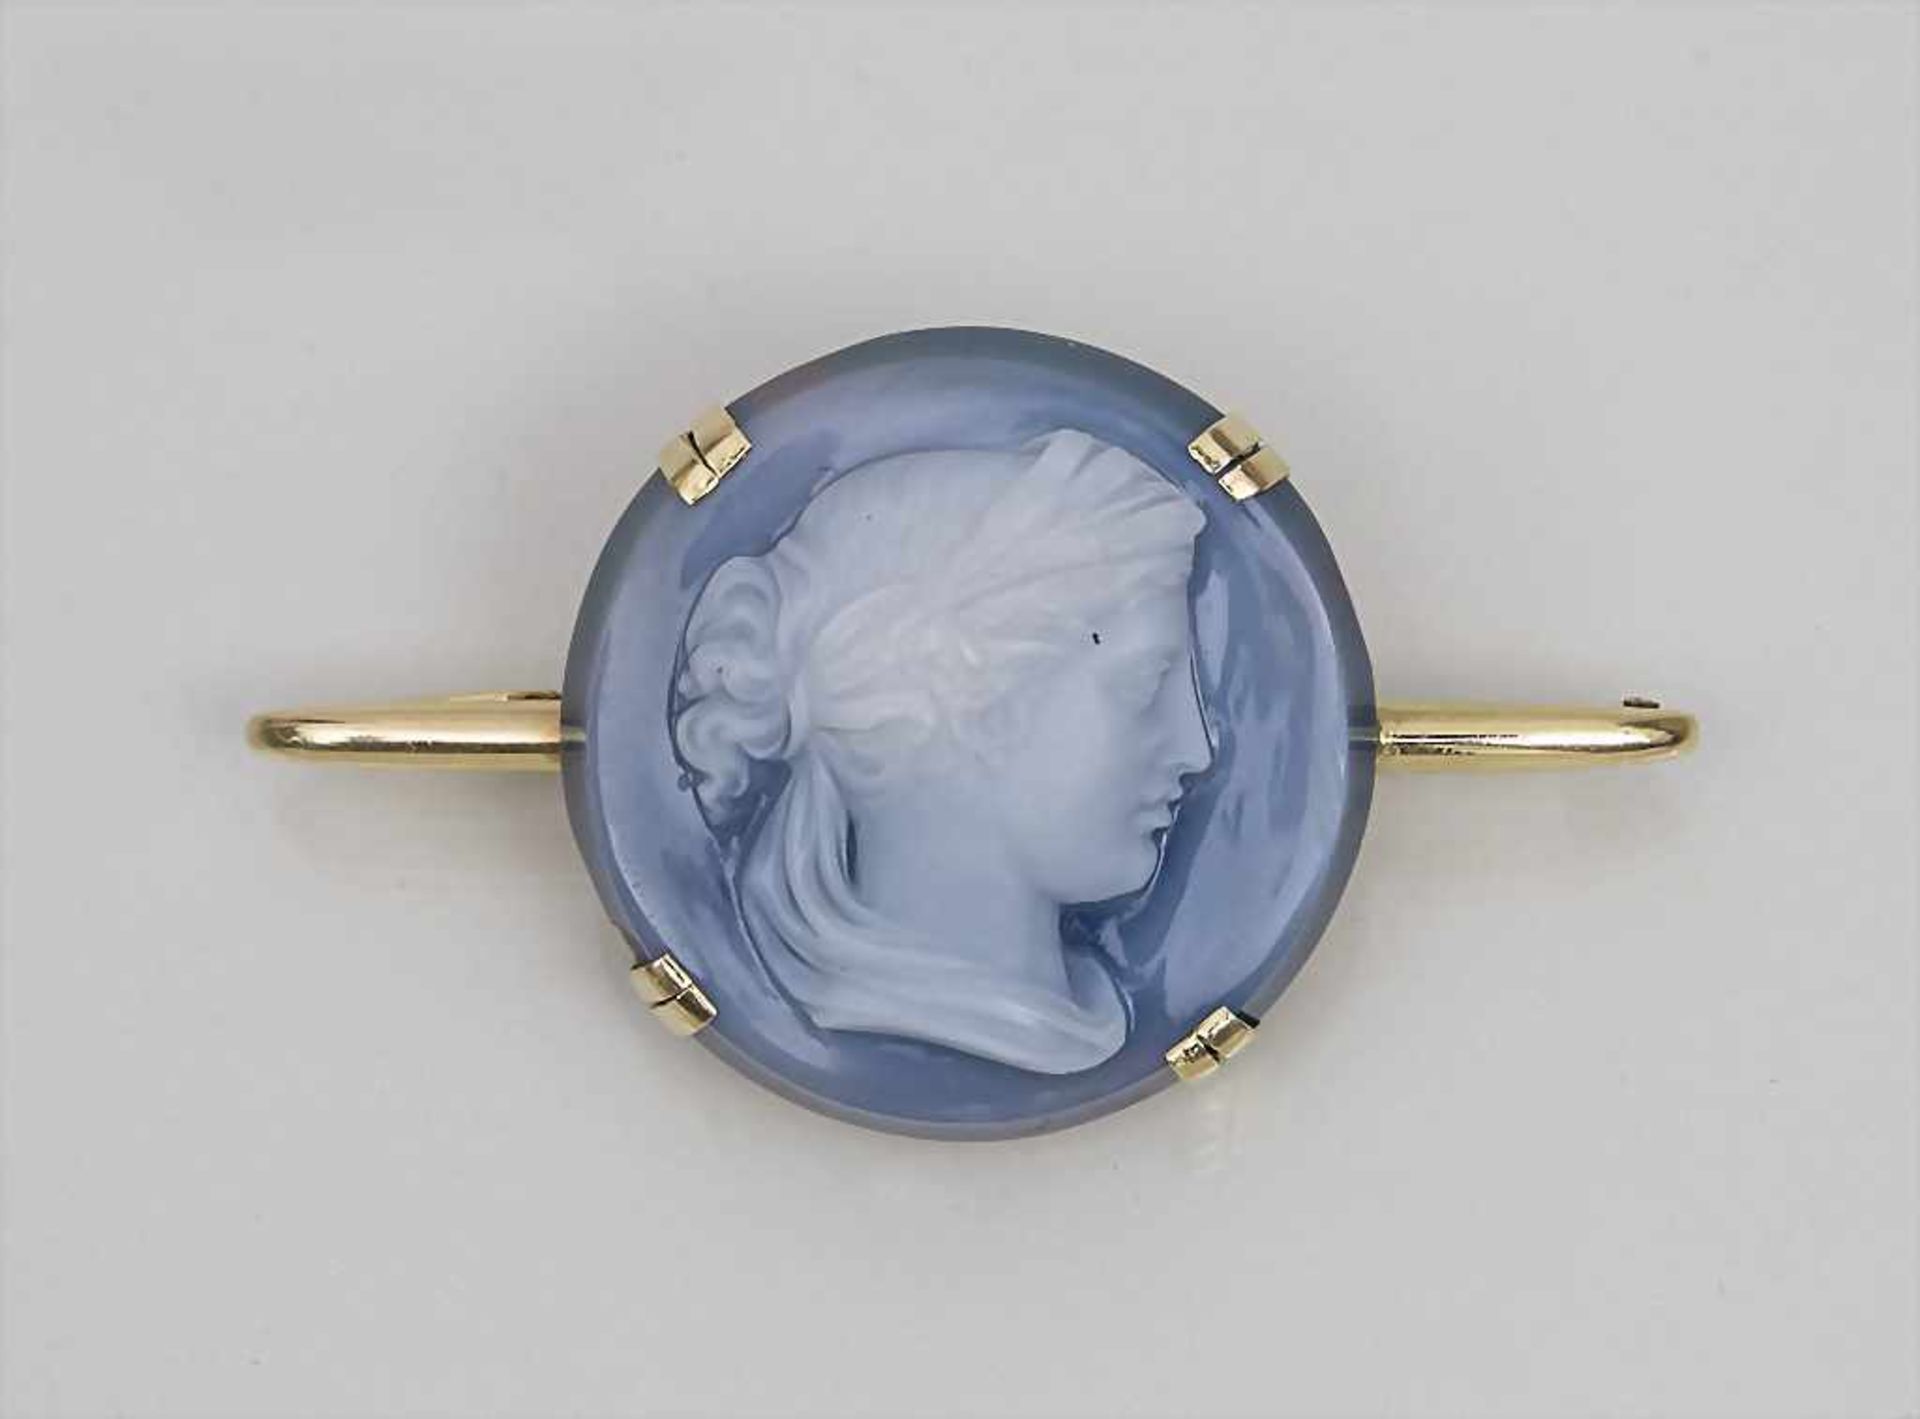 Kamee-Brosche / A Cameo Brooch, Frankreich / FranceMaterial: Fassung Gelbgold 750/000 18 Kt, Achat